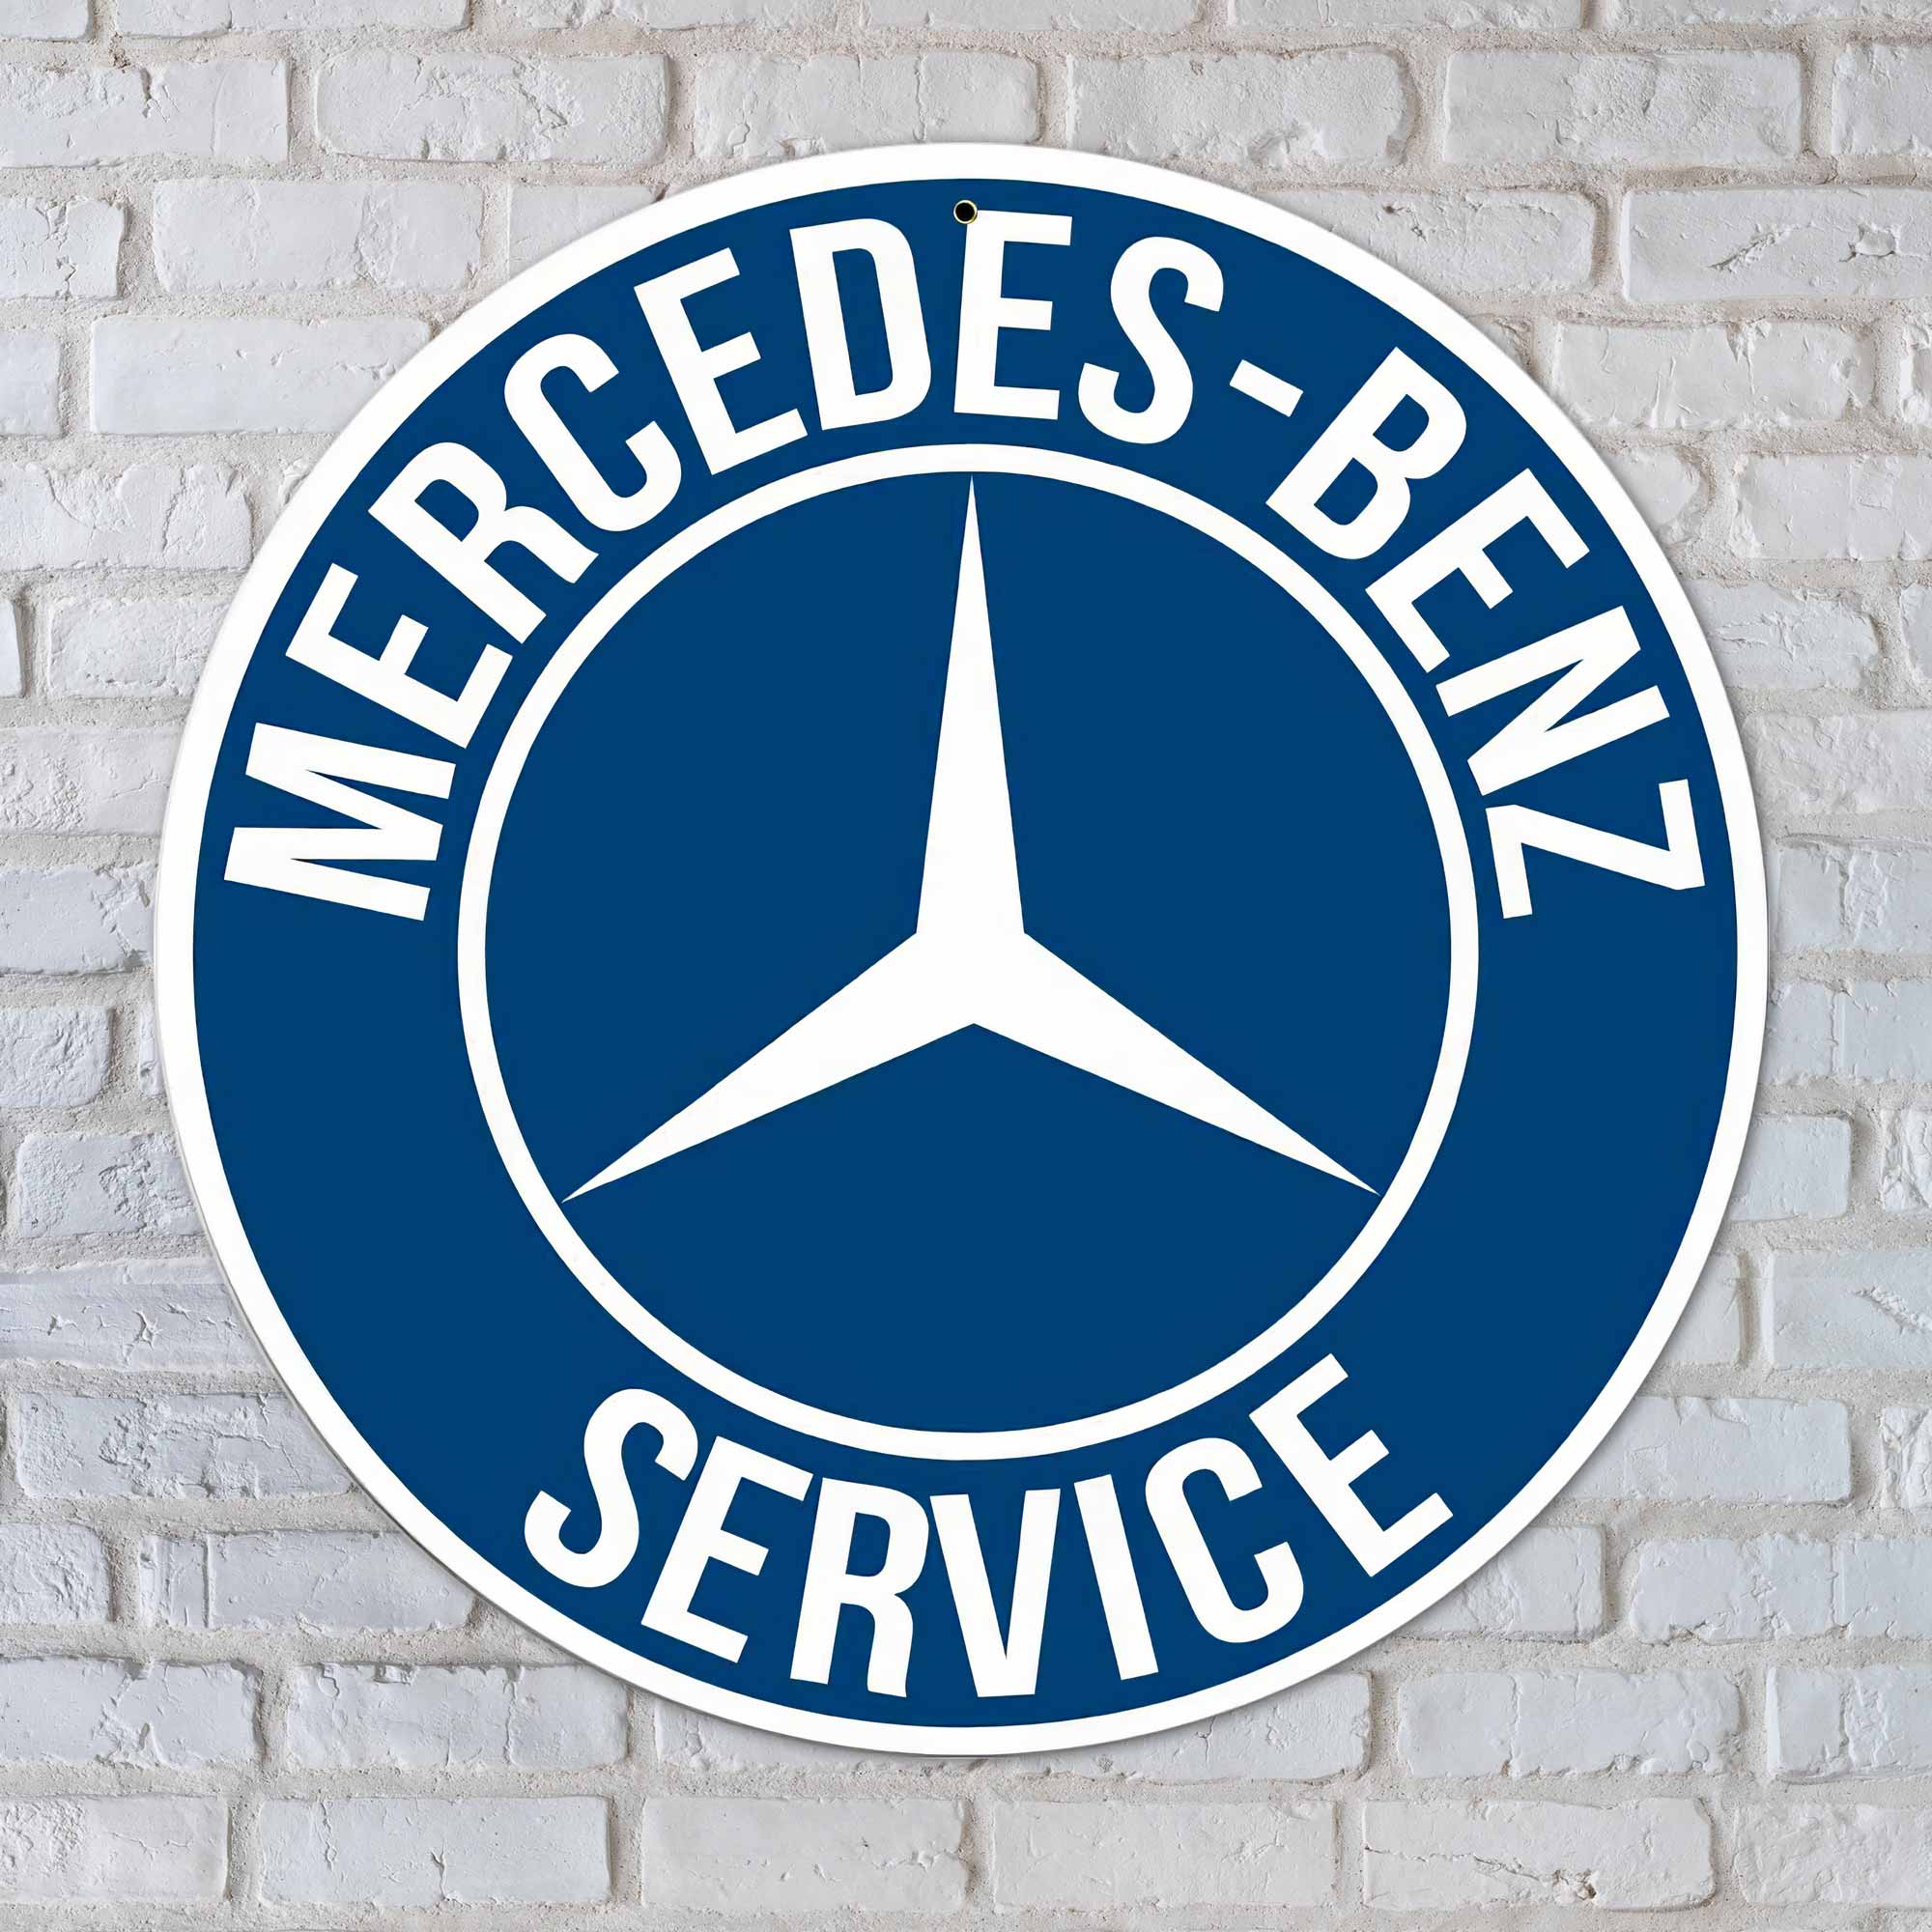 One of Germany's leading automakers, Mercedes Benz and its Service Sign